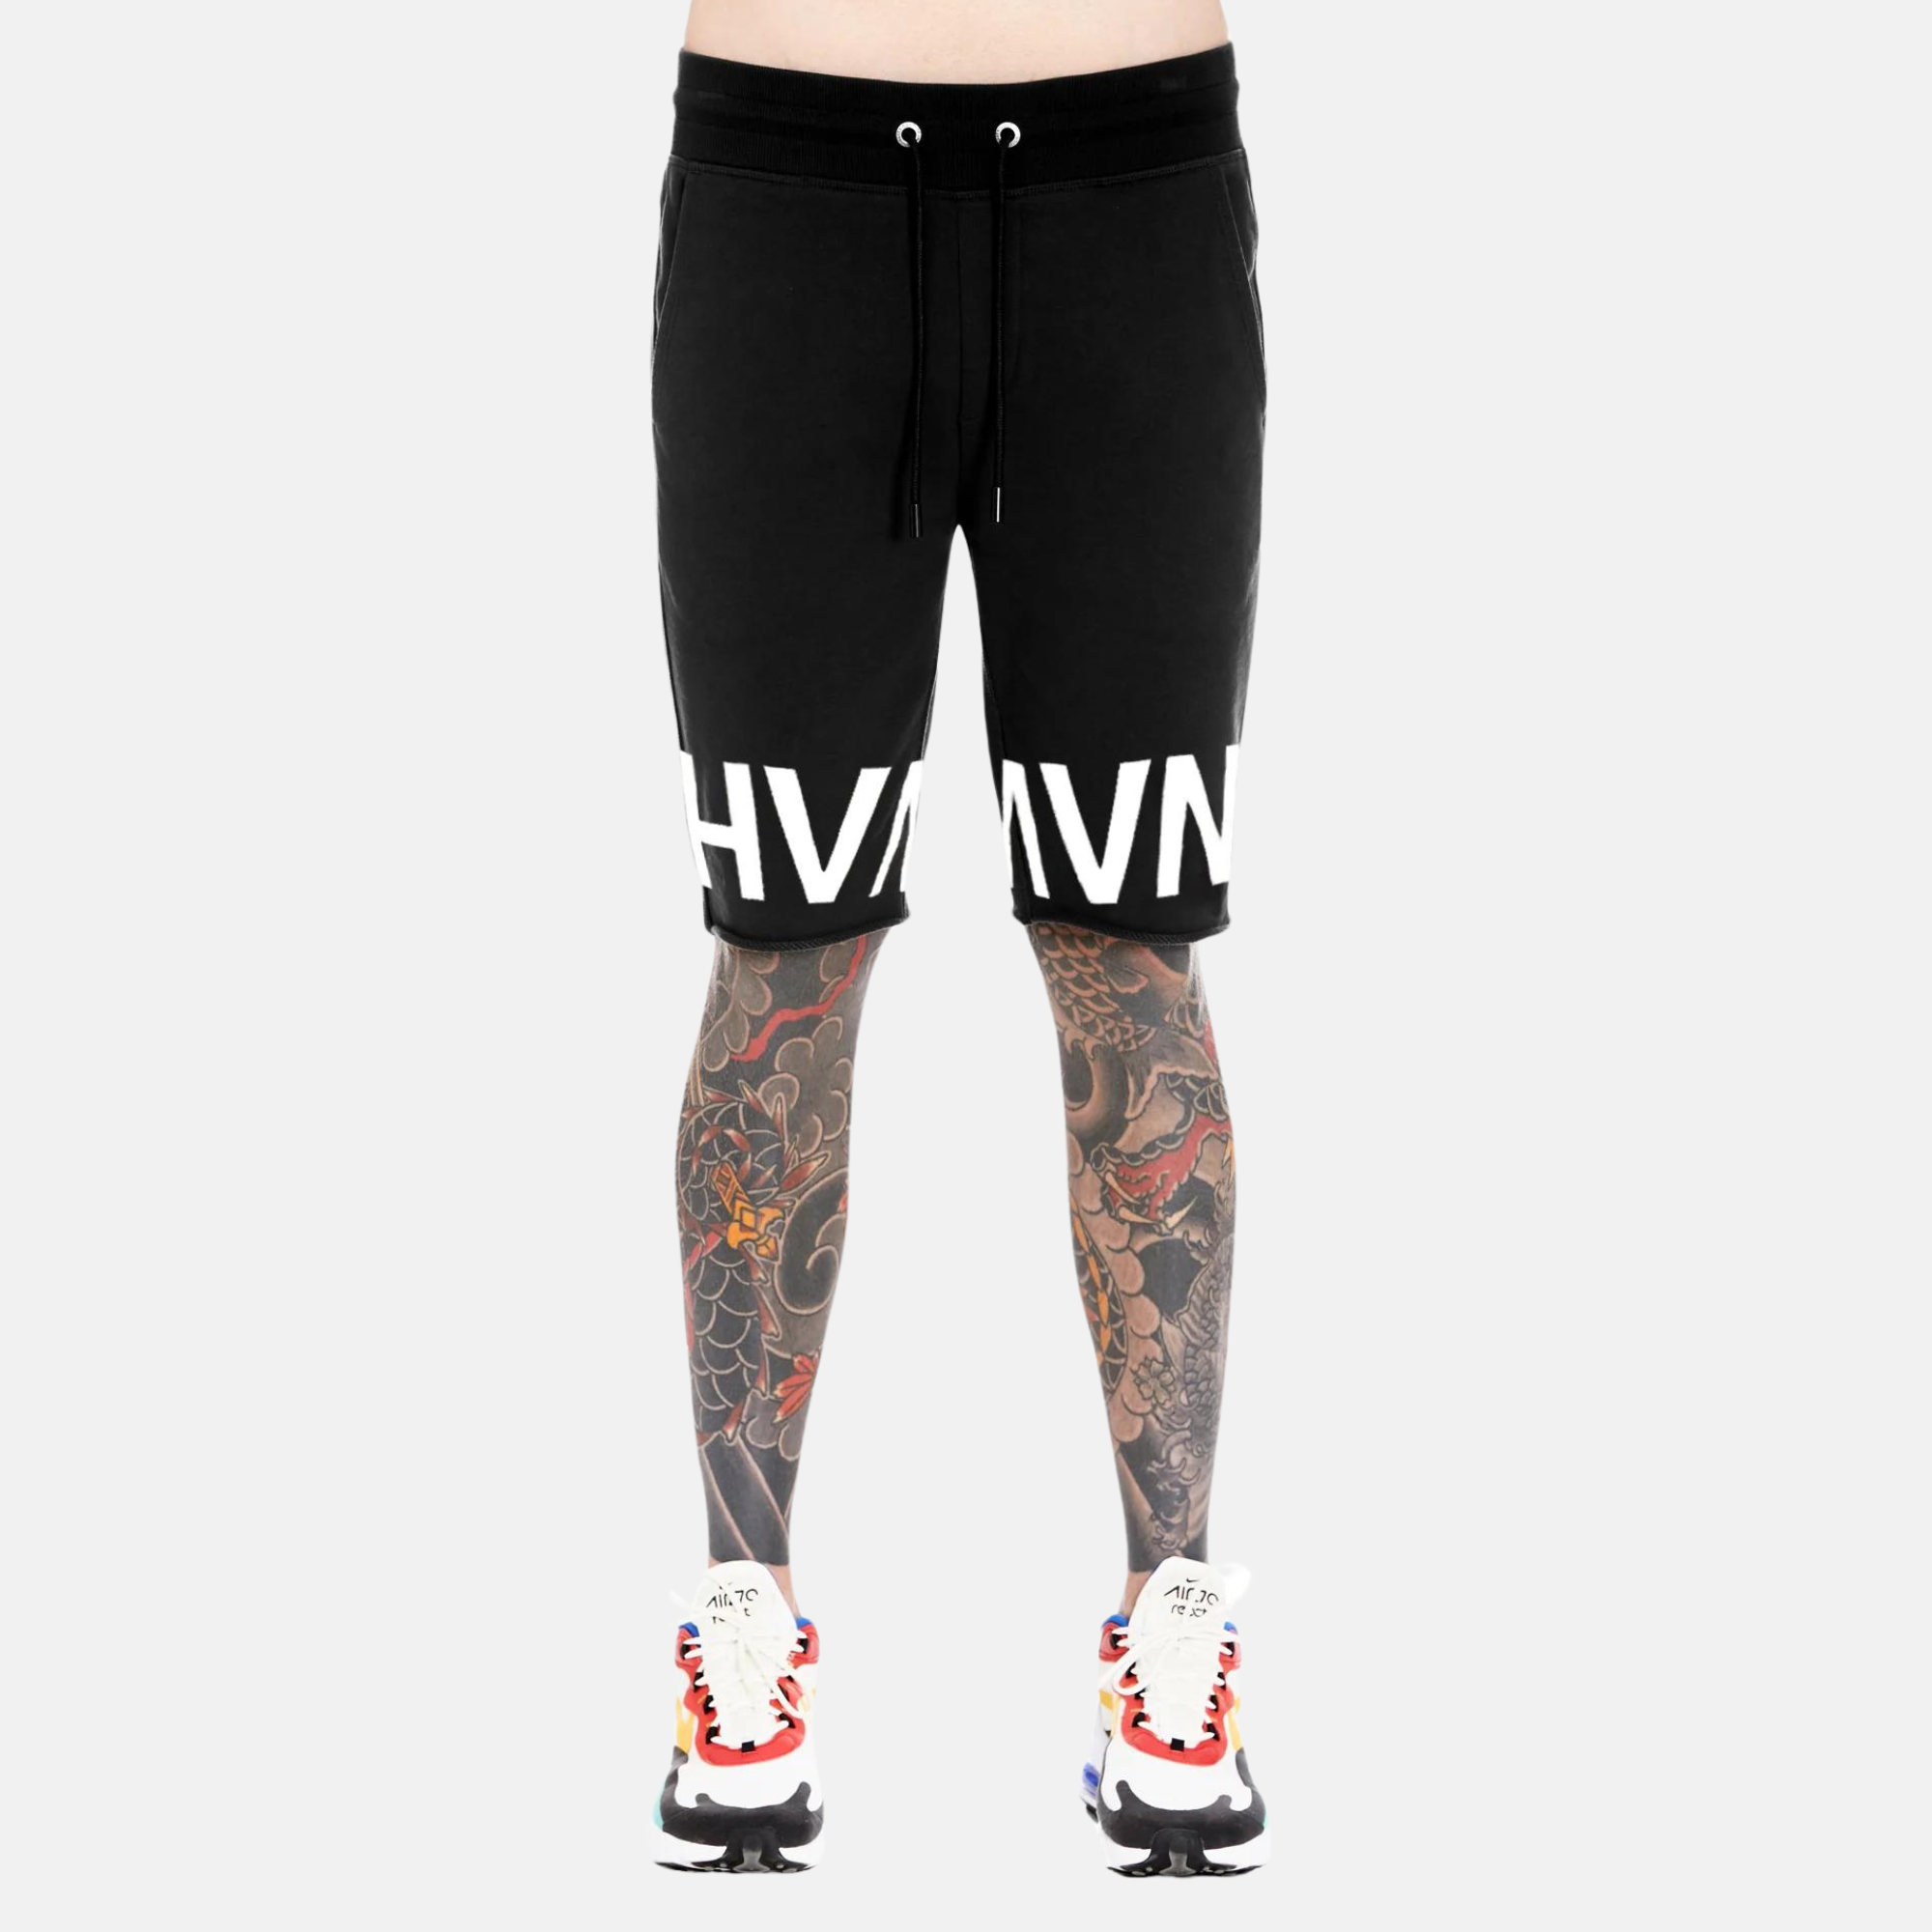 Cult Of Individuality HVMAN French Terry Sweat Short